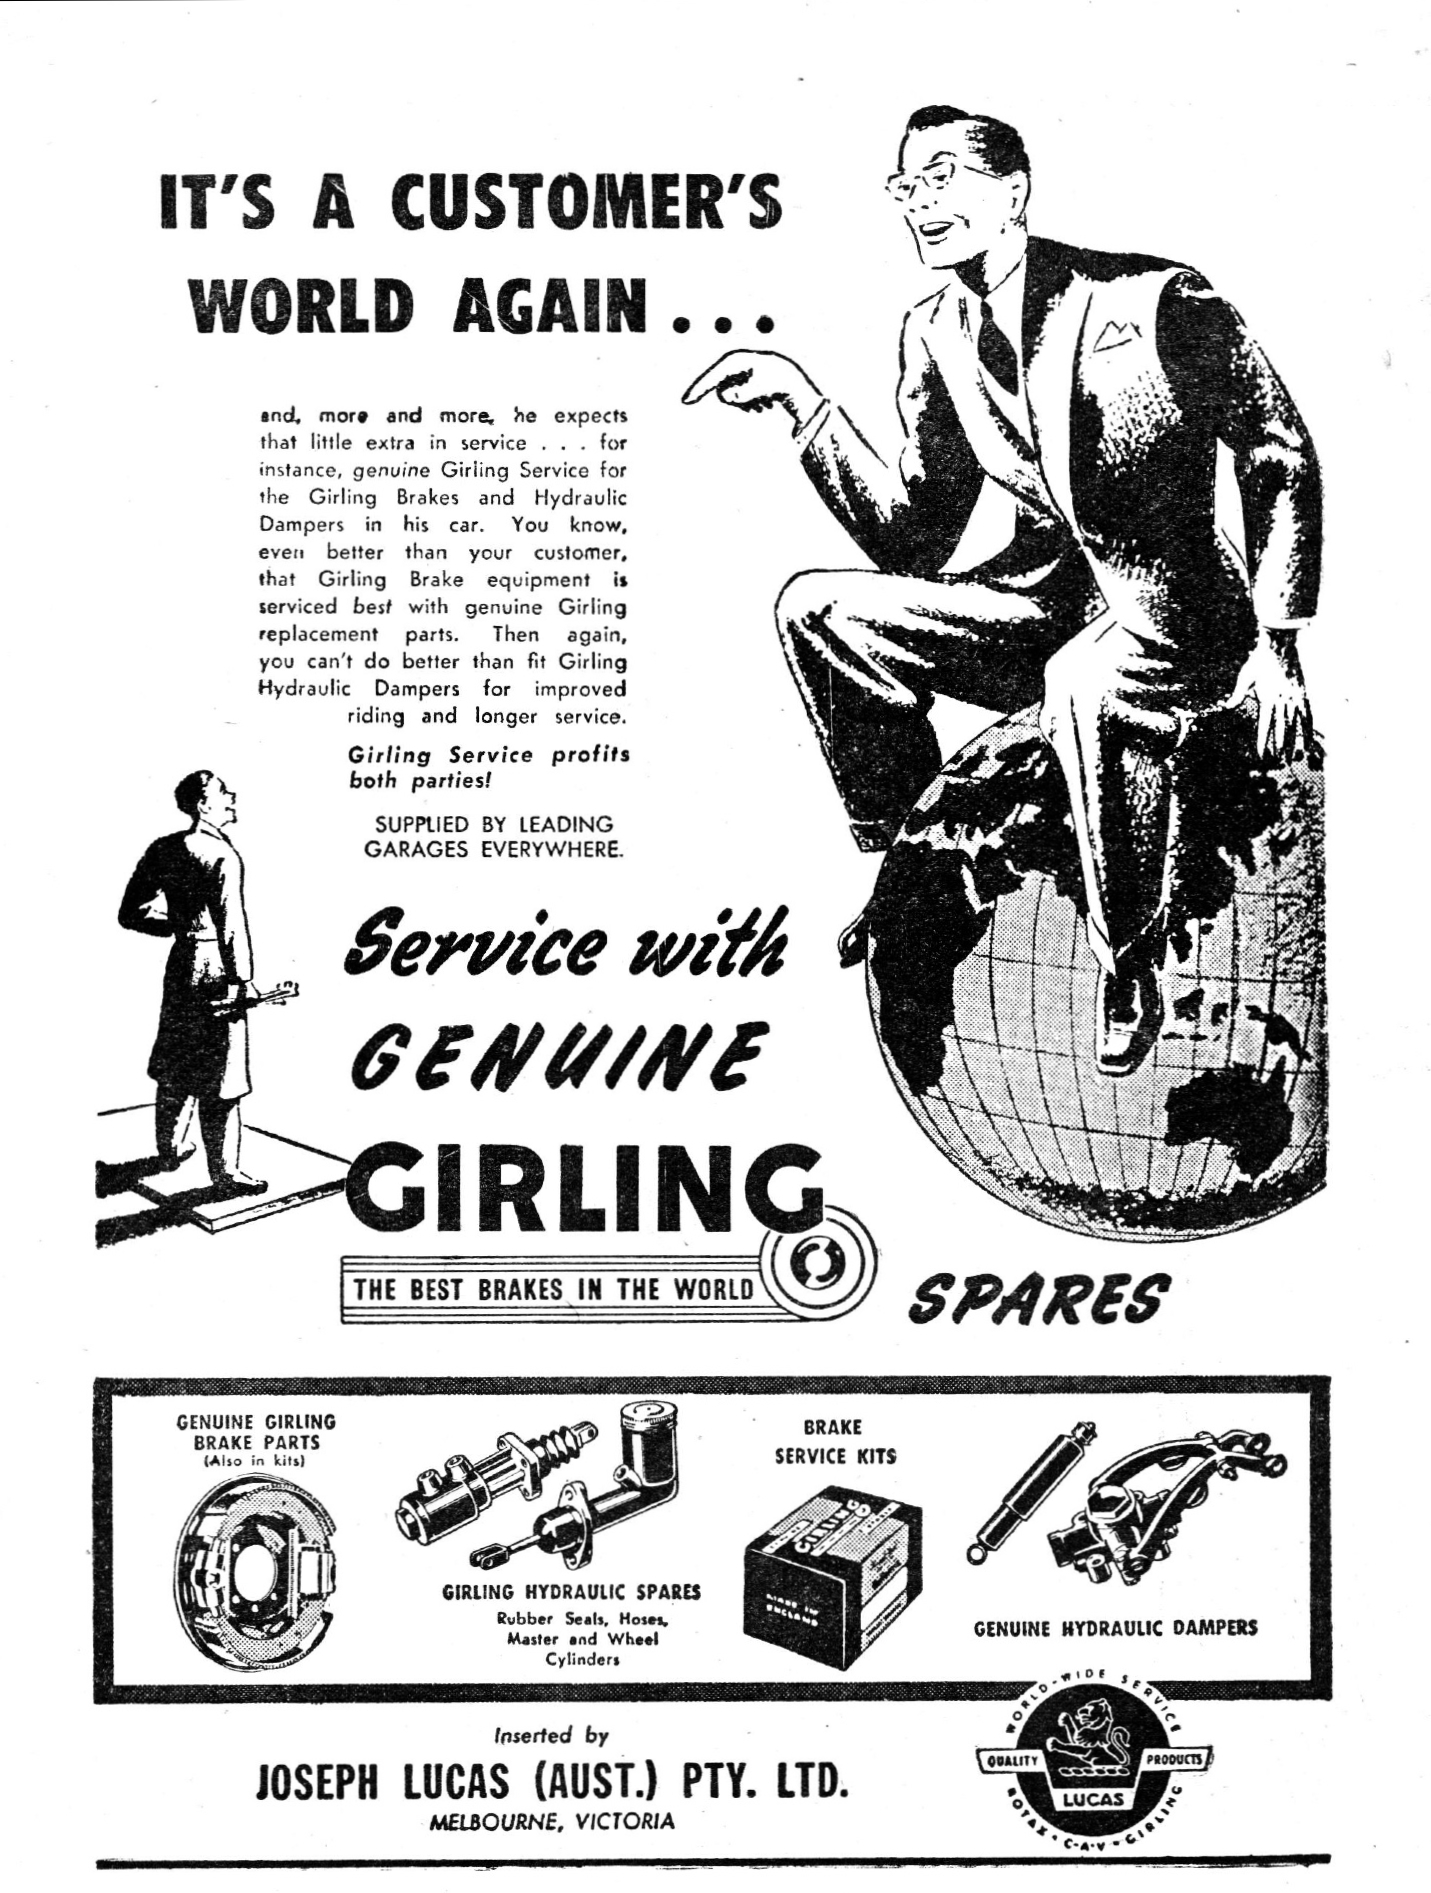 an advertit from the sears electric company